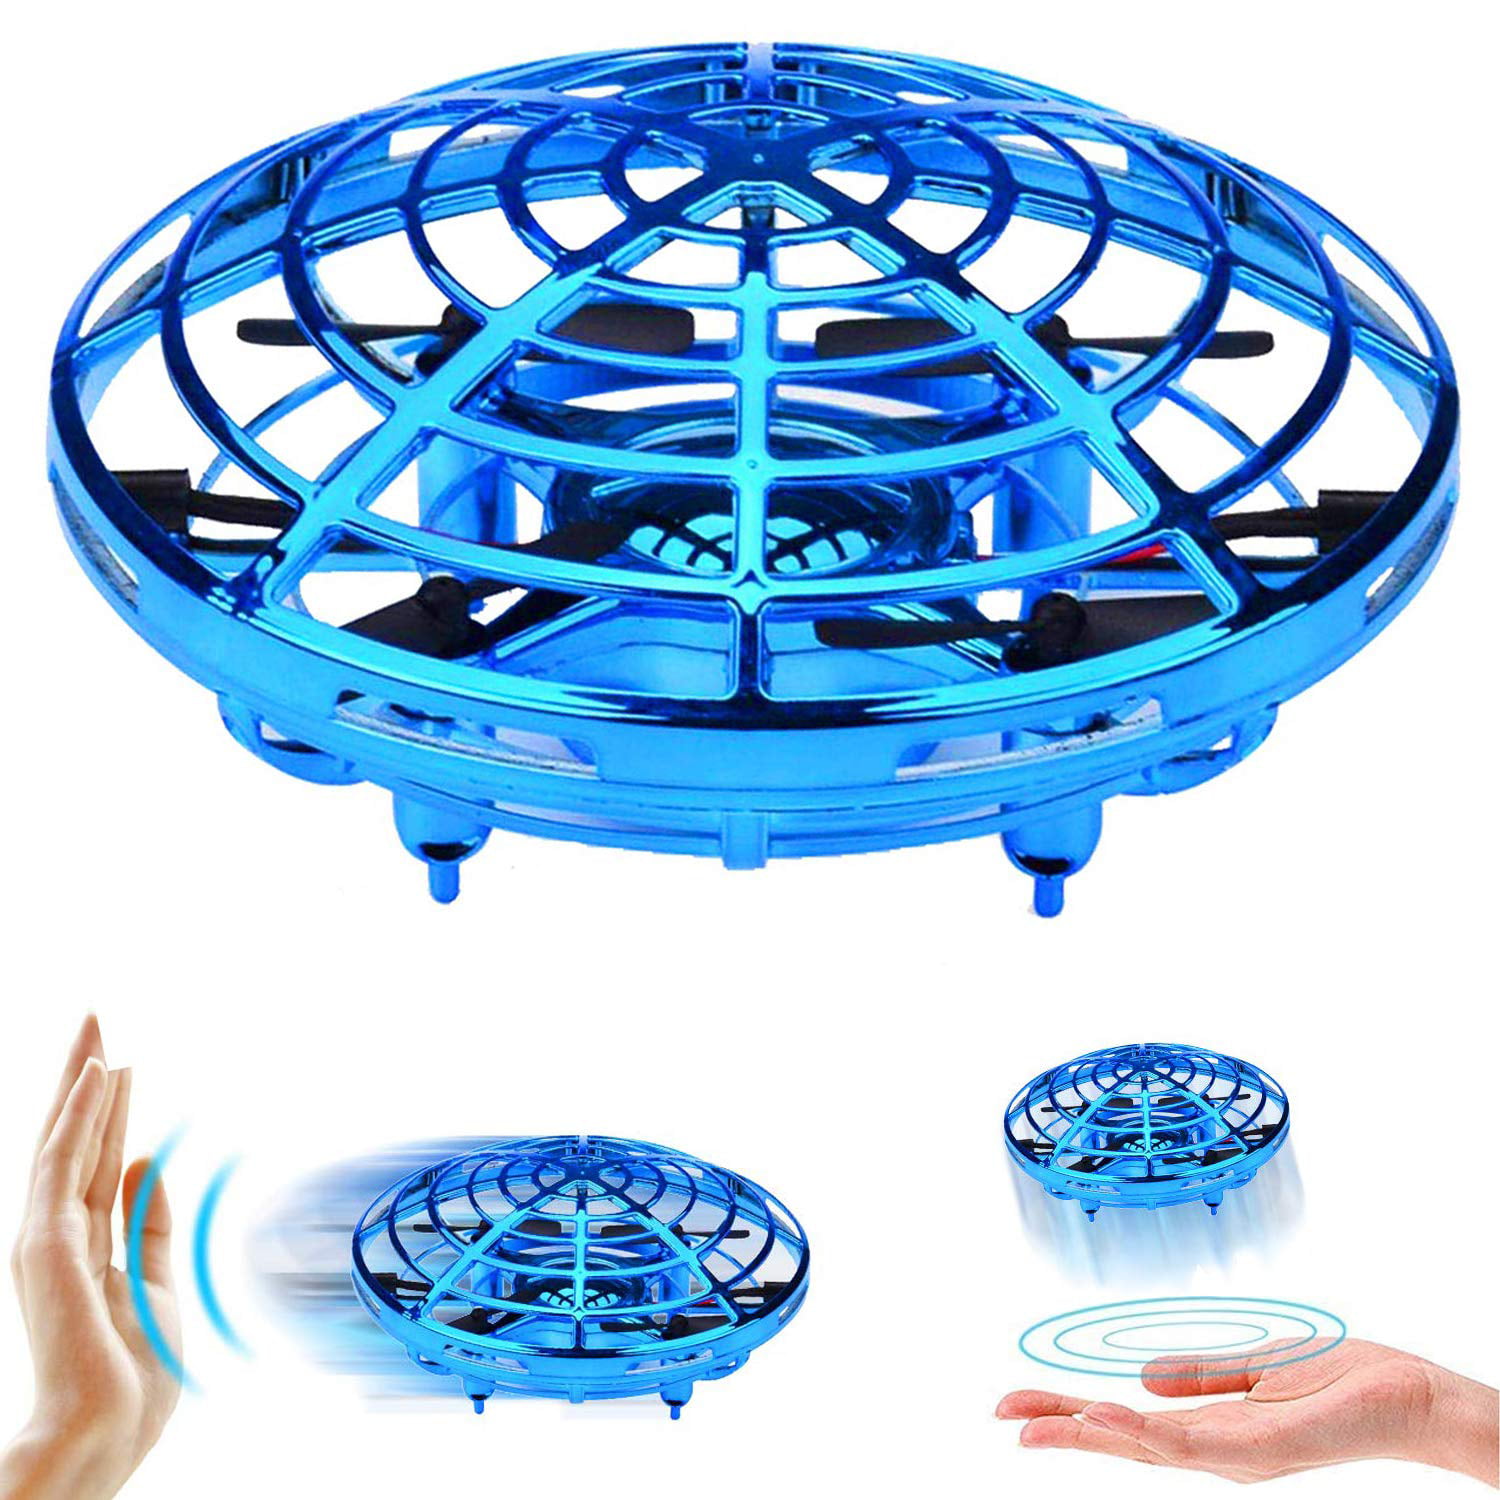 TURN RAISE Motion Hand-Controlled Suspension Helicopter Toy Infrared Induction Interactive Drone Indoor Flyer Toys With 360°Rotating and Flashing LED Lights for Kids Girls Boys UFO Flying Ball Toys 